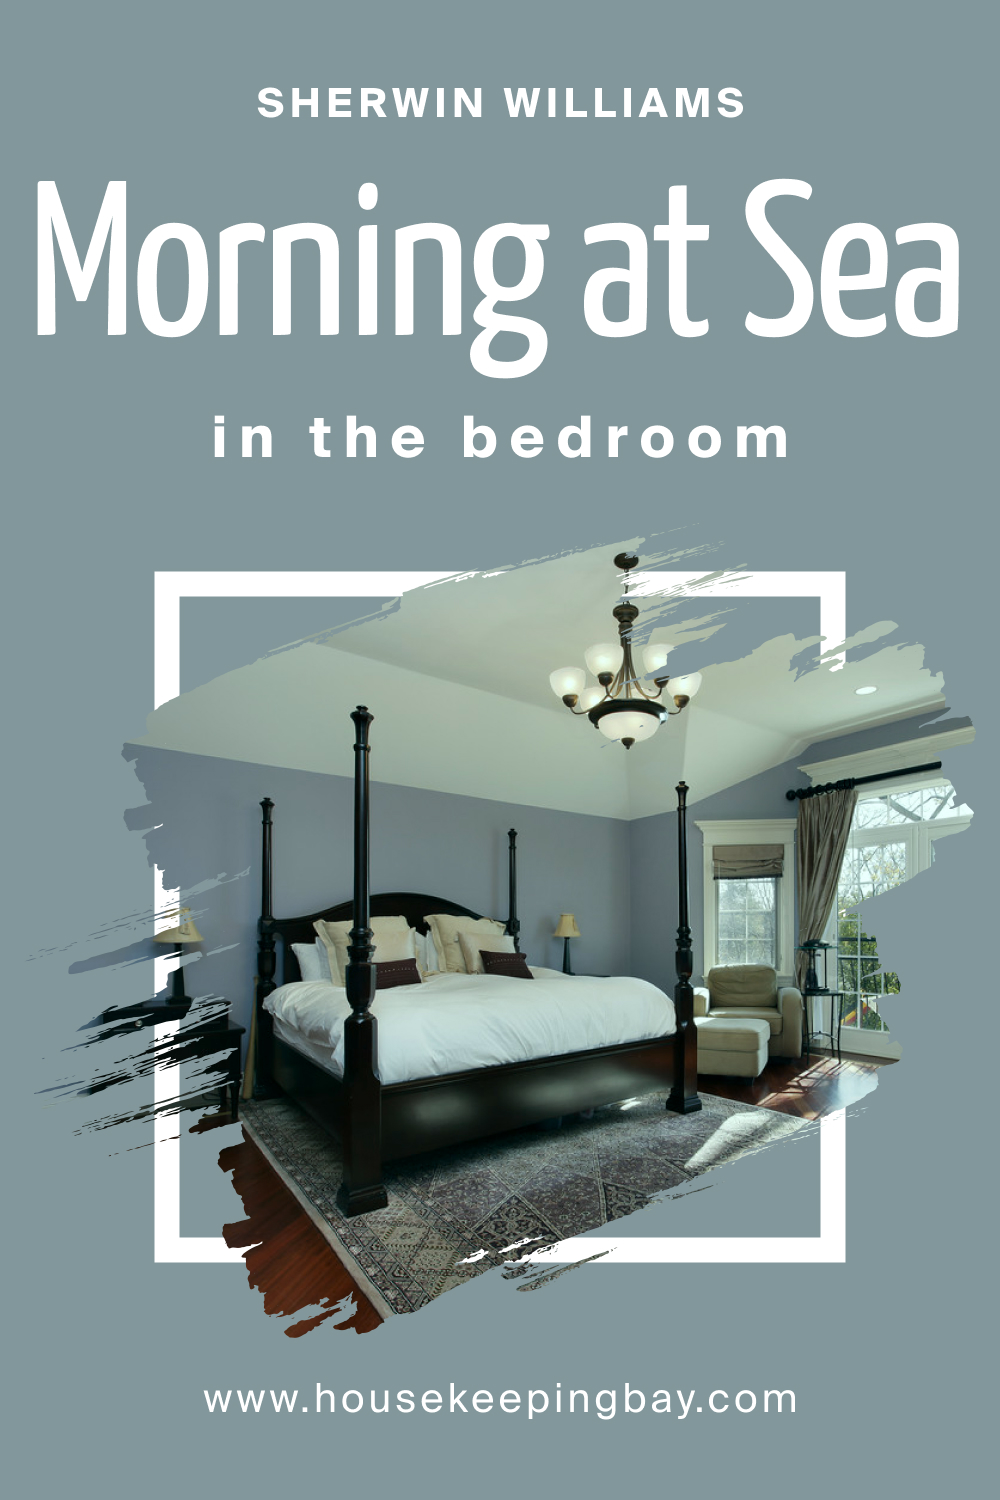 Sherwin Williams. SW 9634 Morning at Sea For the bedroom